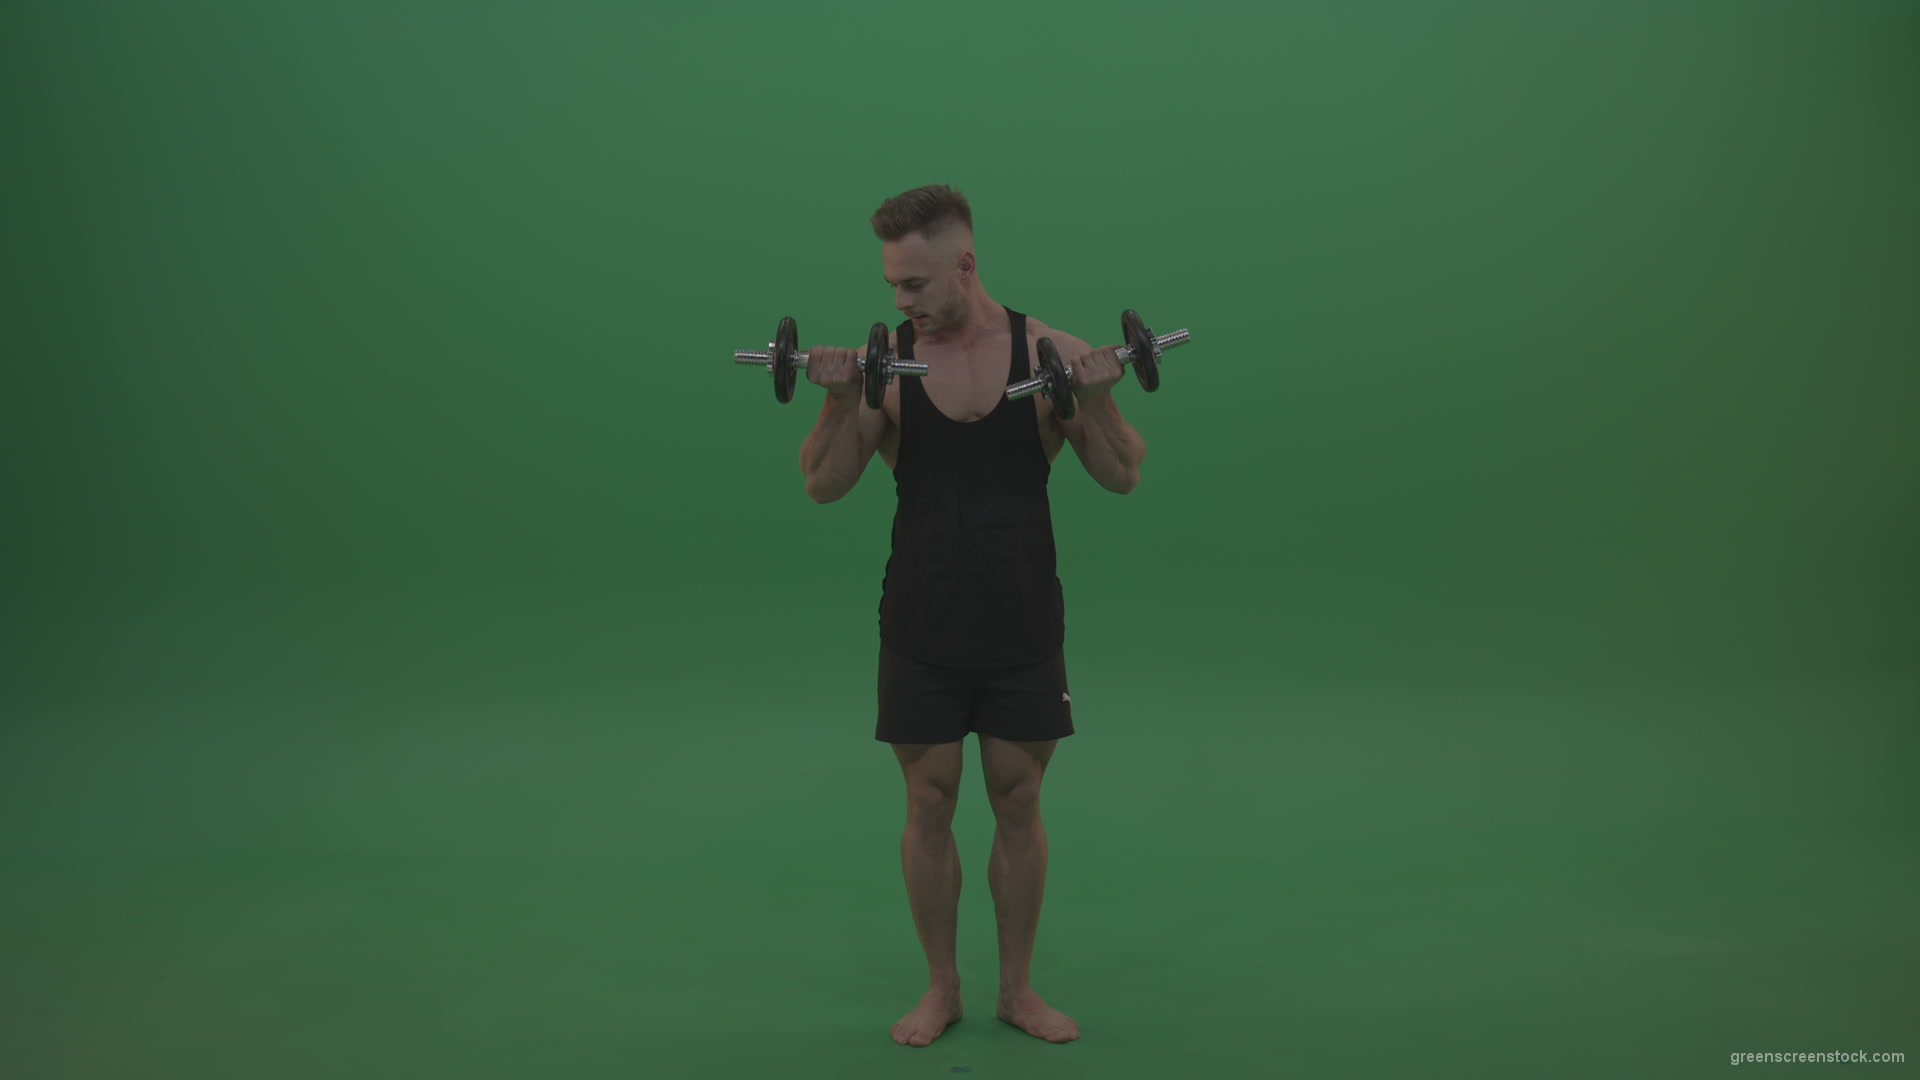 Young_Bodybuilder_Wearing_Black_Sport_Clothes_Doing_Slow_Dumbbell_Push_Ups_On_Green_Screen_Chroma_Key_Wall_Background_005 Green Screen Stock